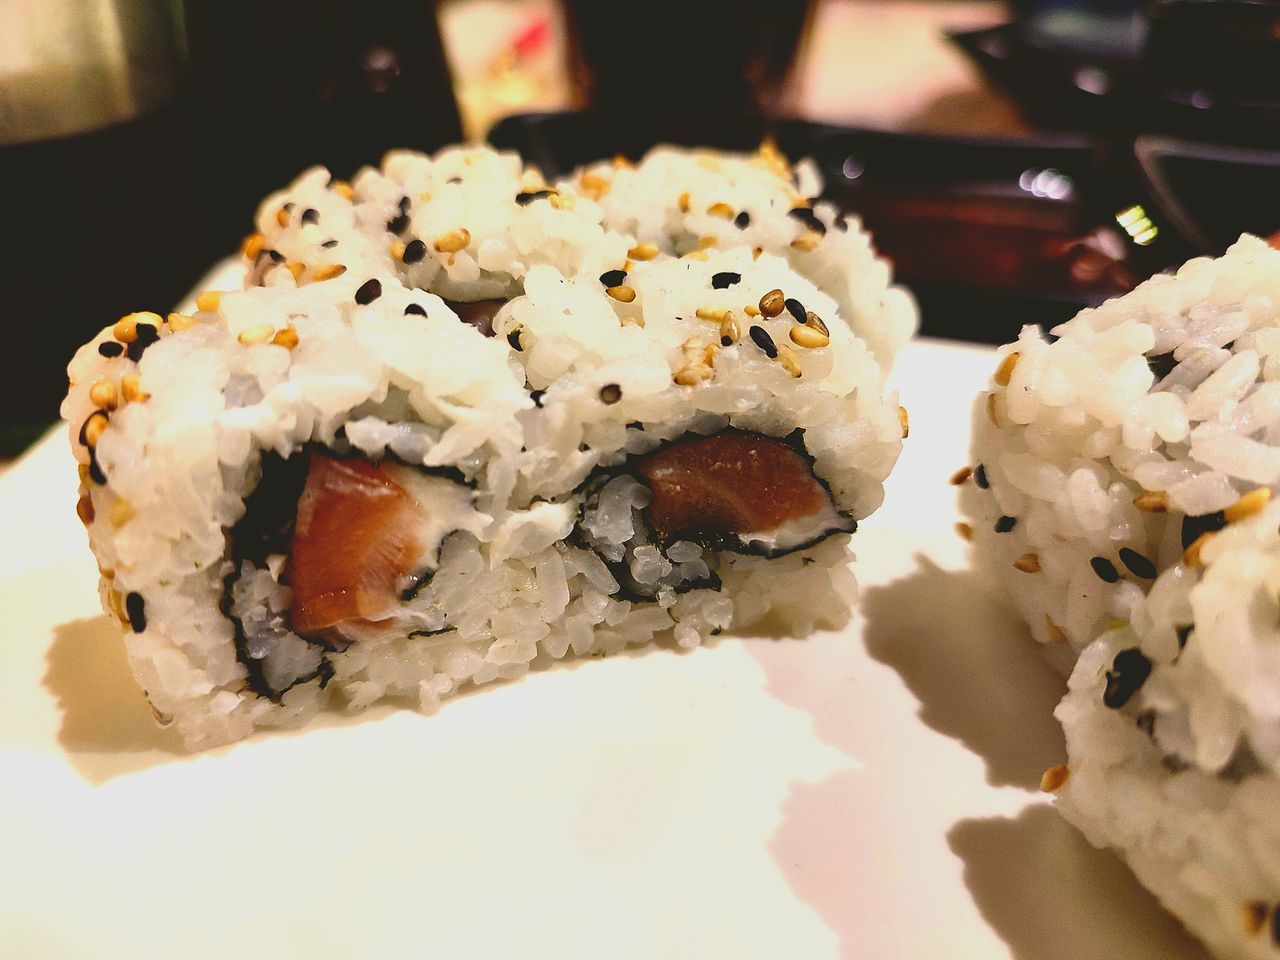 food and drink, food, sushi, california roll, freshness, asian food, cuisine, japanese food, indoors, rice, still life, dish, close-up, no people, seafood, serving size, meal, healthy eating, wellbeing, japanese cuisine, culture, focus on foreground, temptation, rice - food staple, table